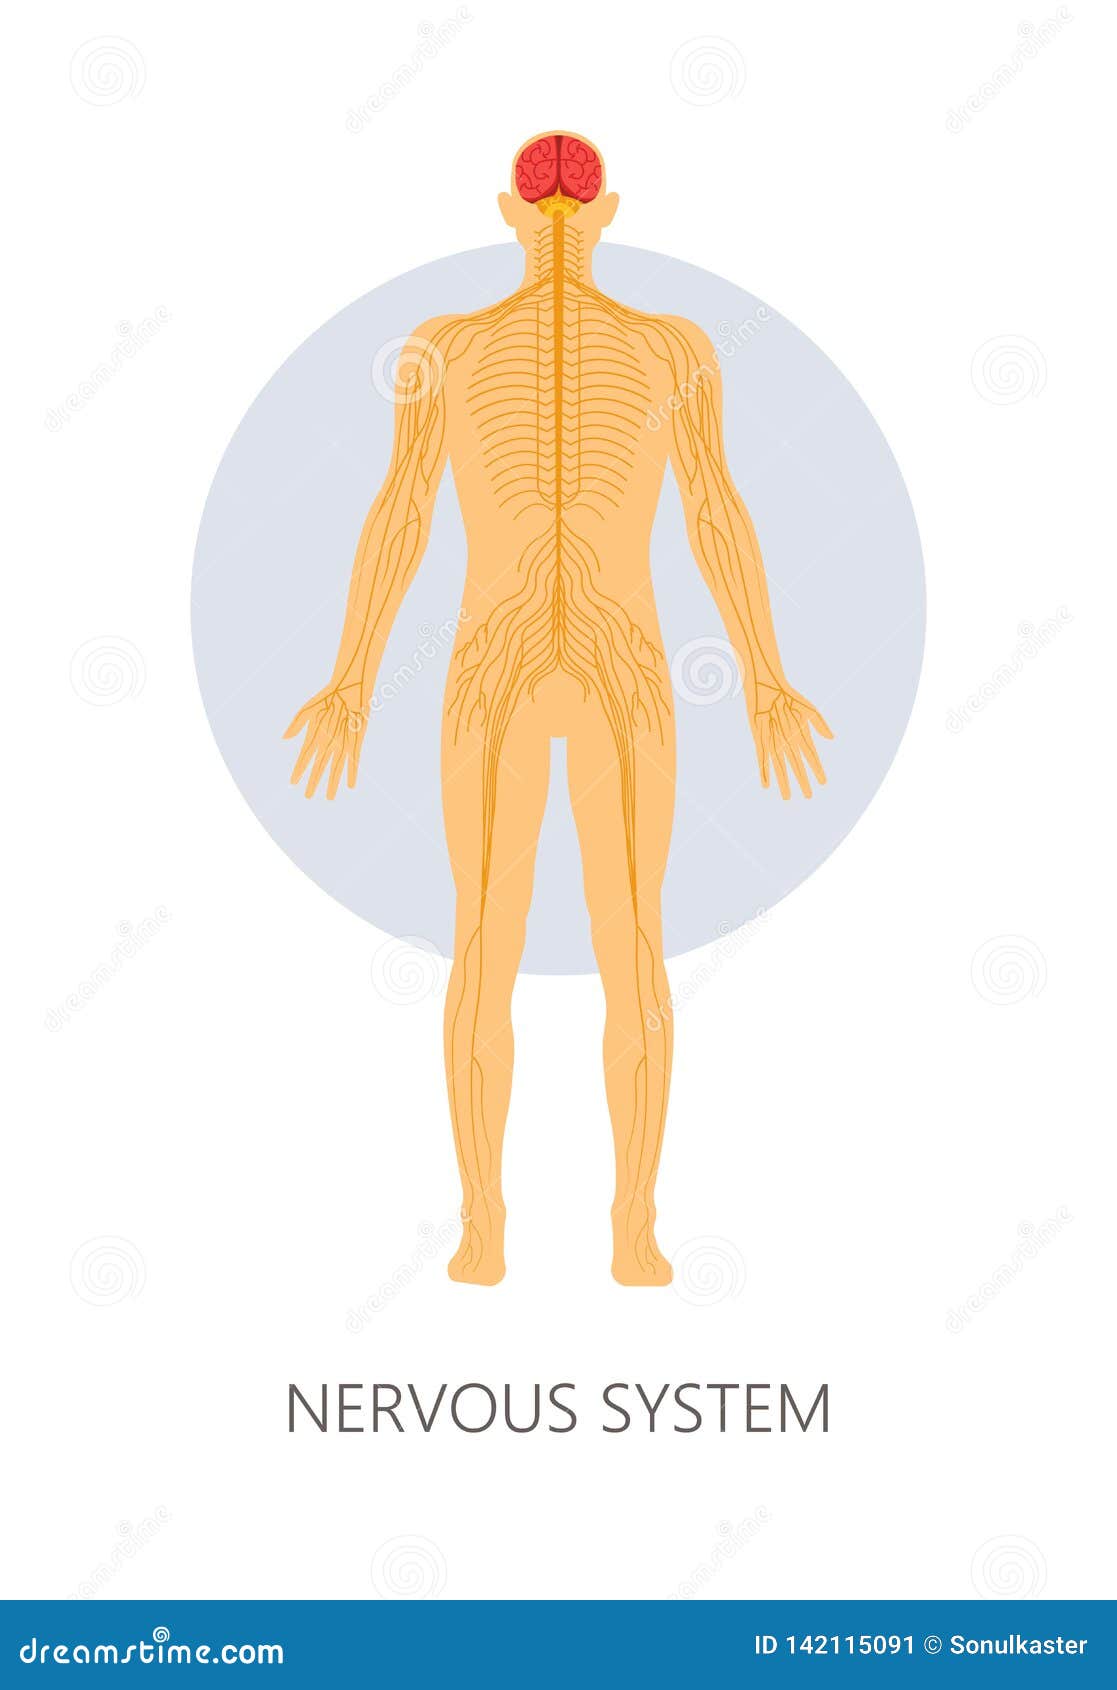 nervous system brain and nerve endings  anatomy